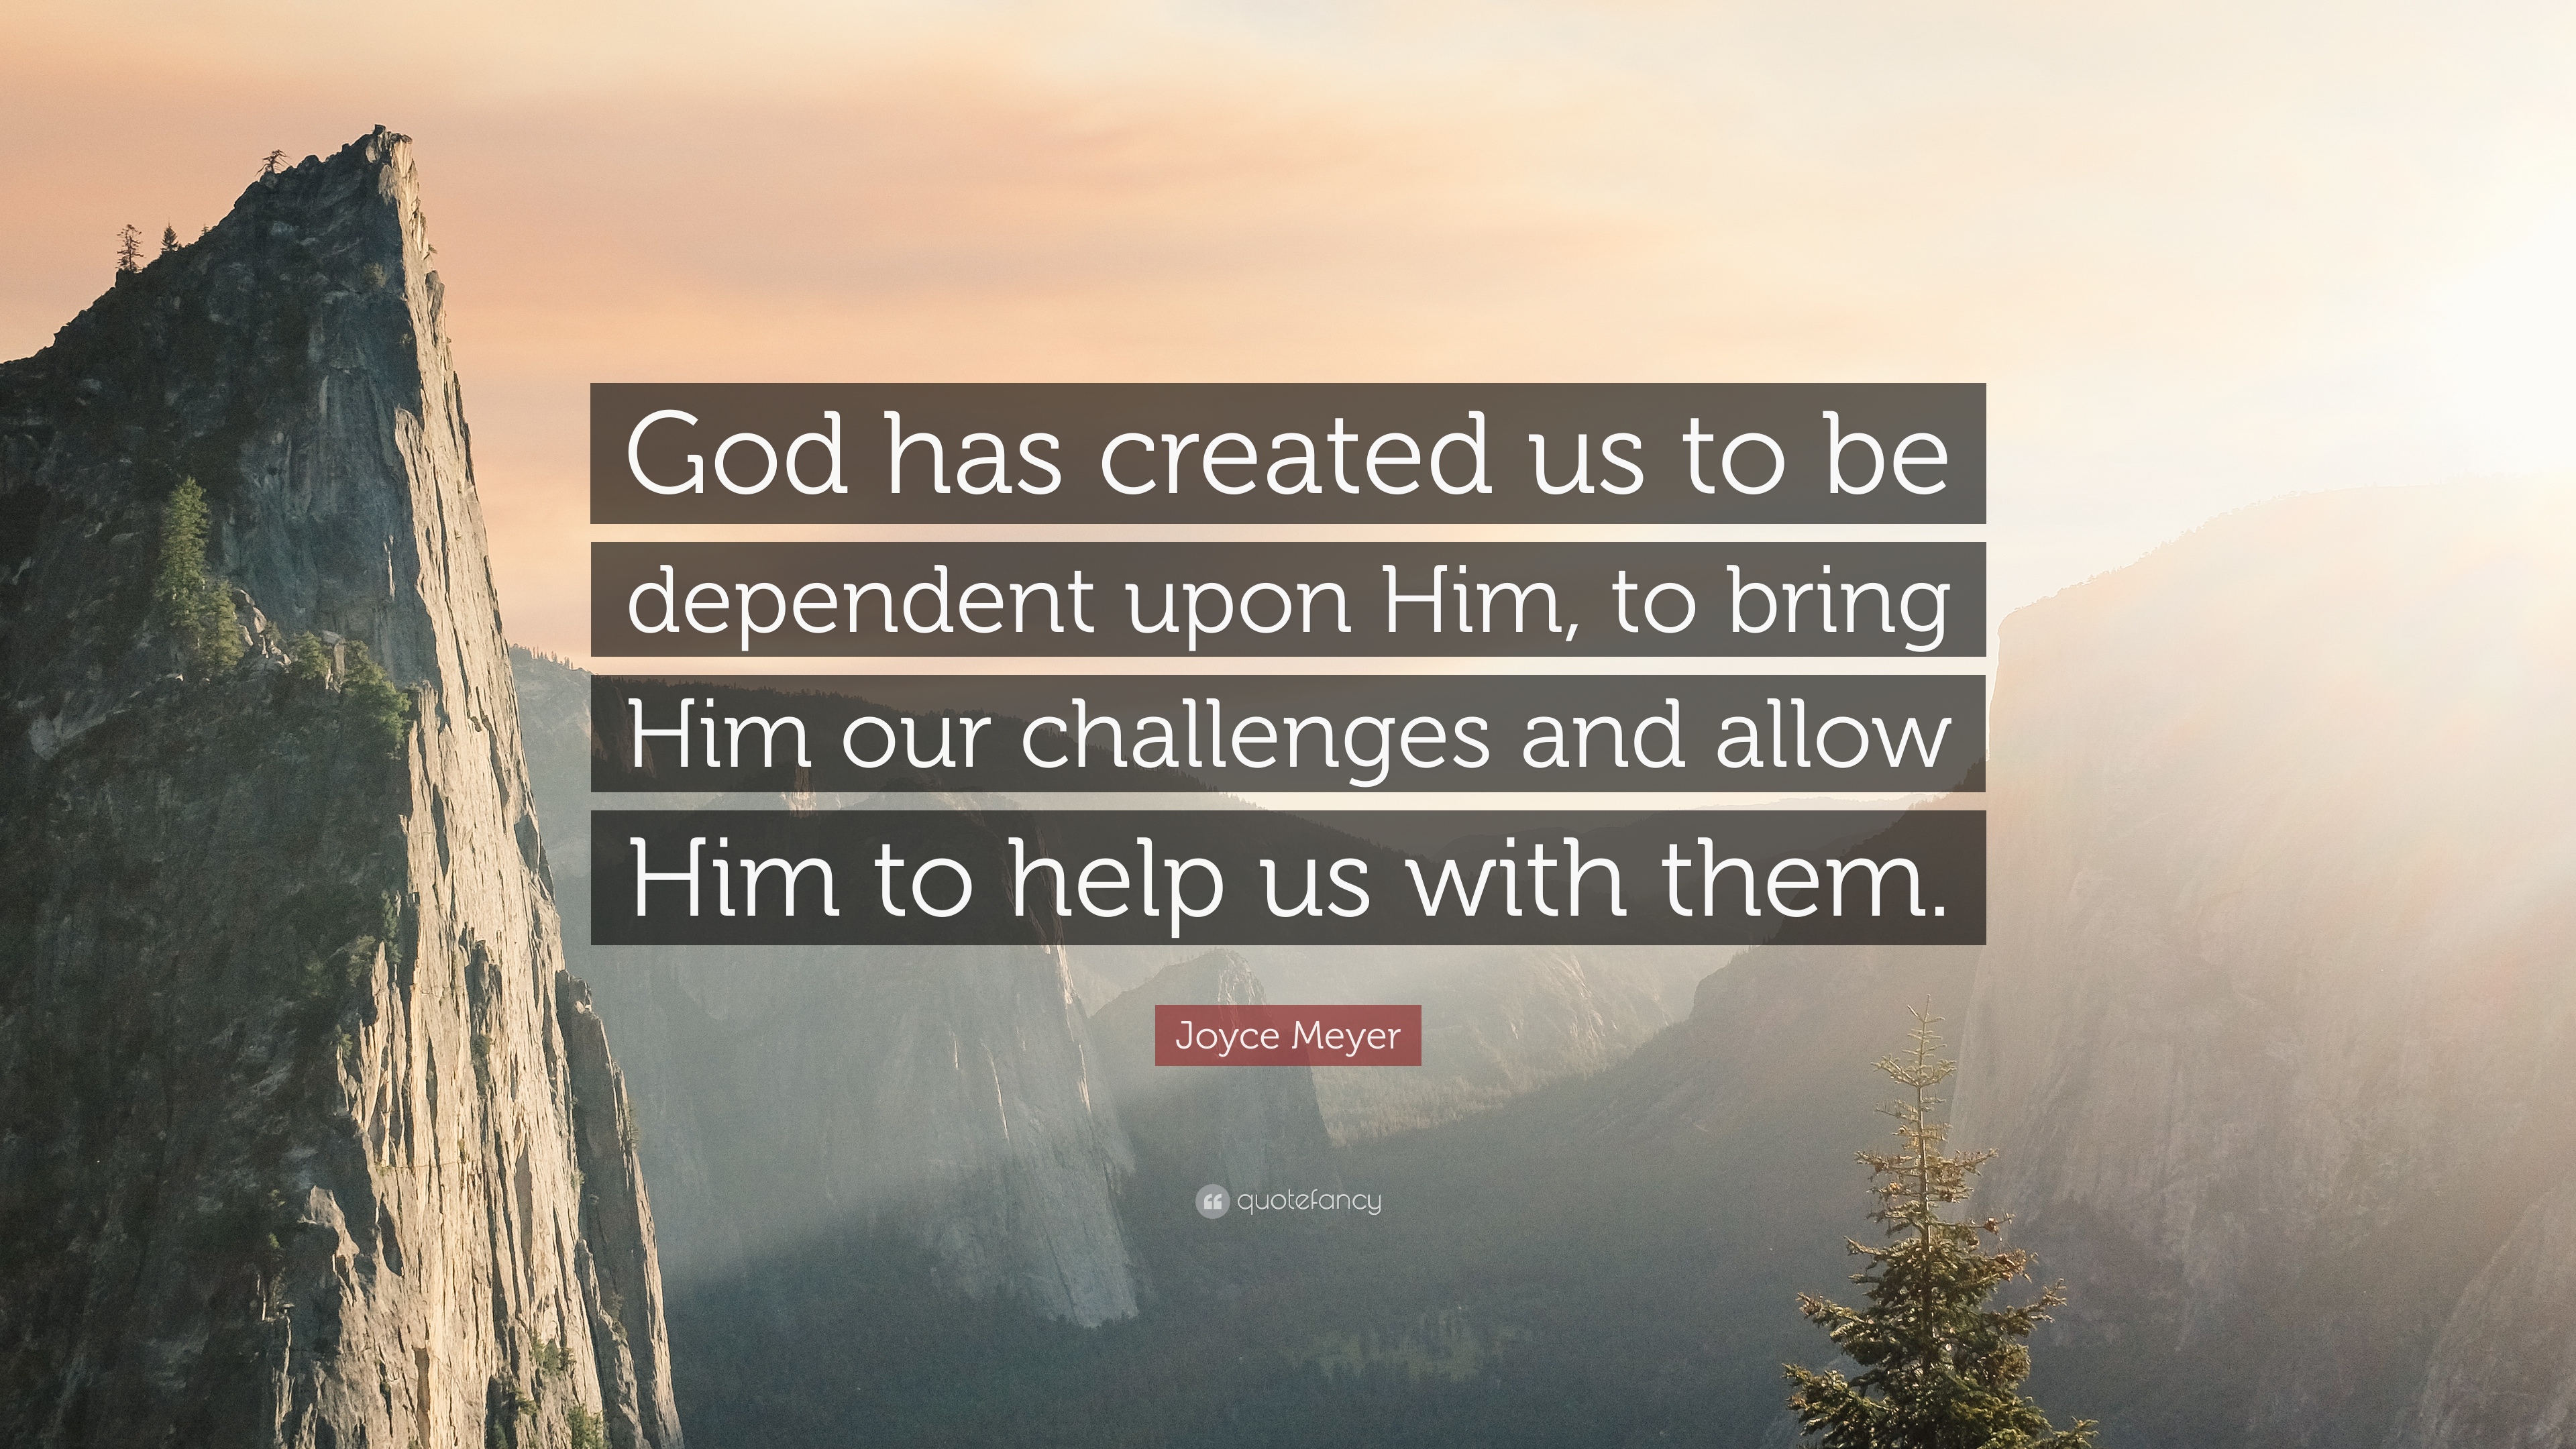 100495-Joyce-Meyer-Quote-God-has-created-us-to-be-dependent-upon-Him-to.jpg